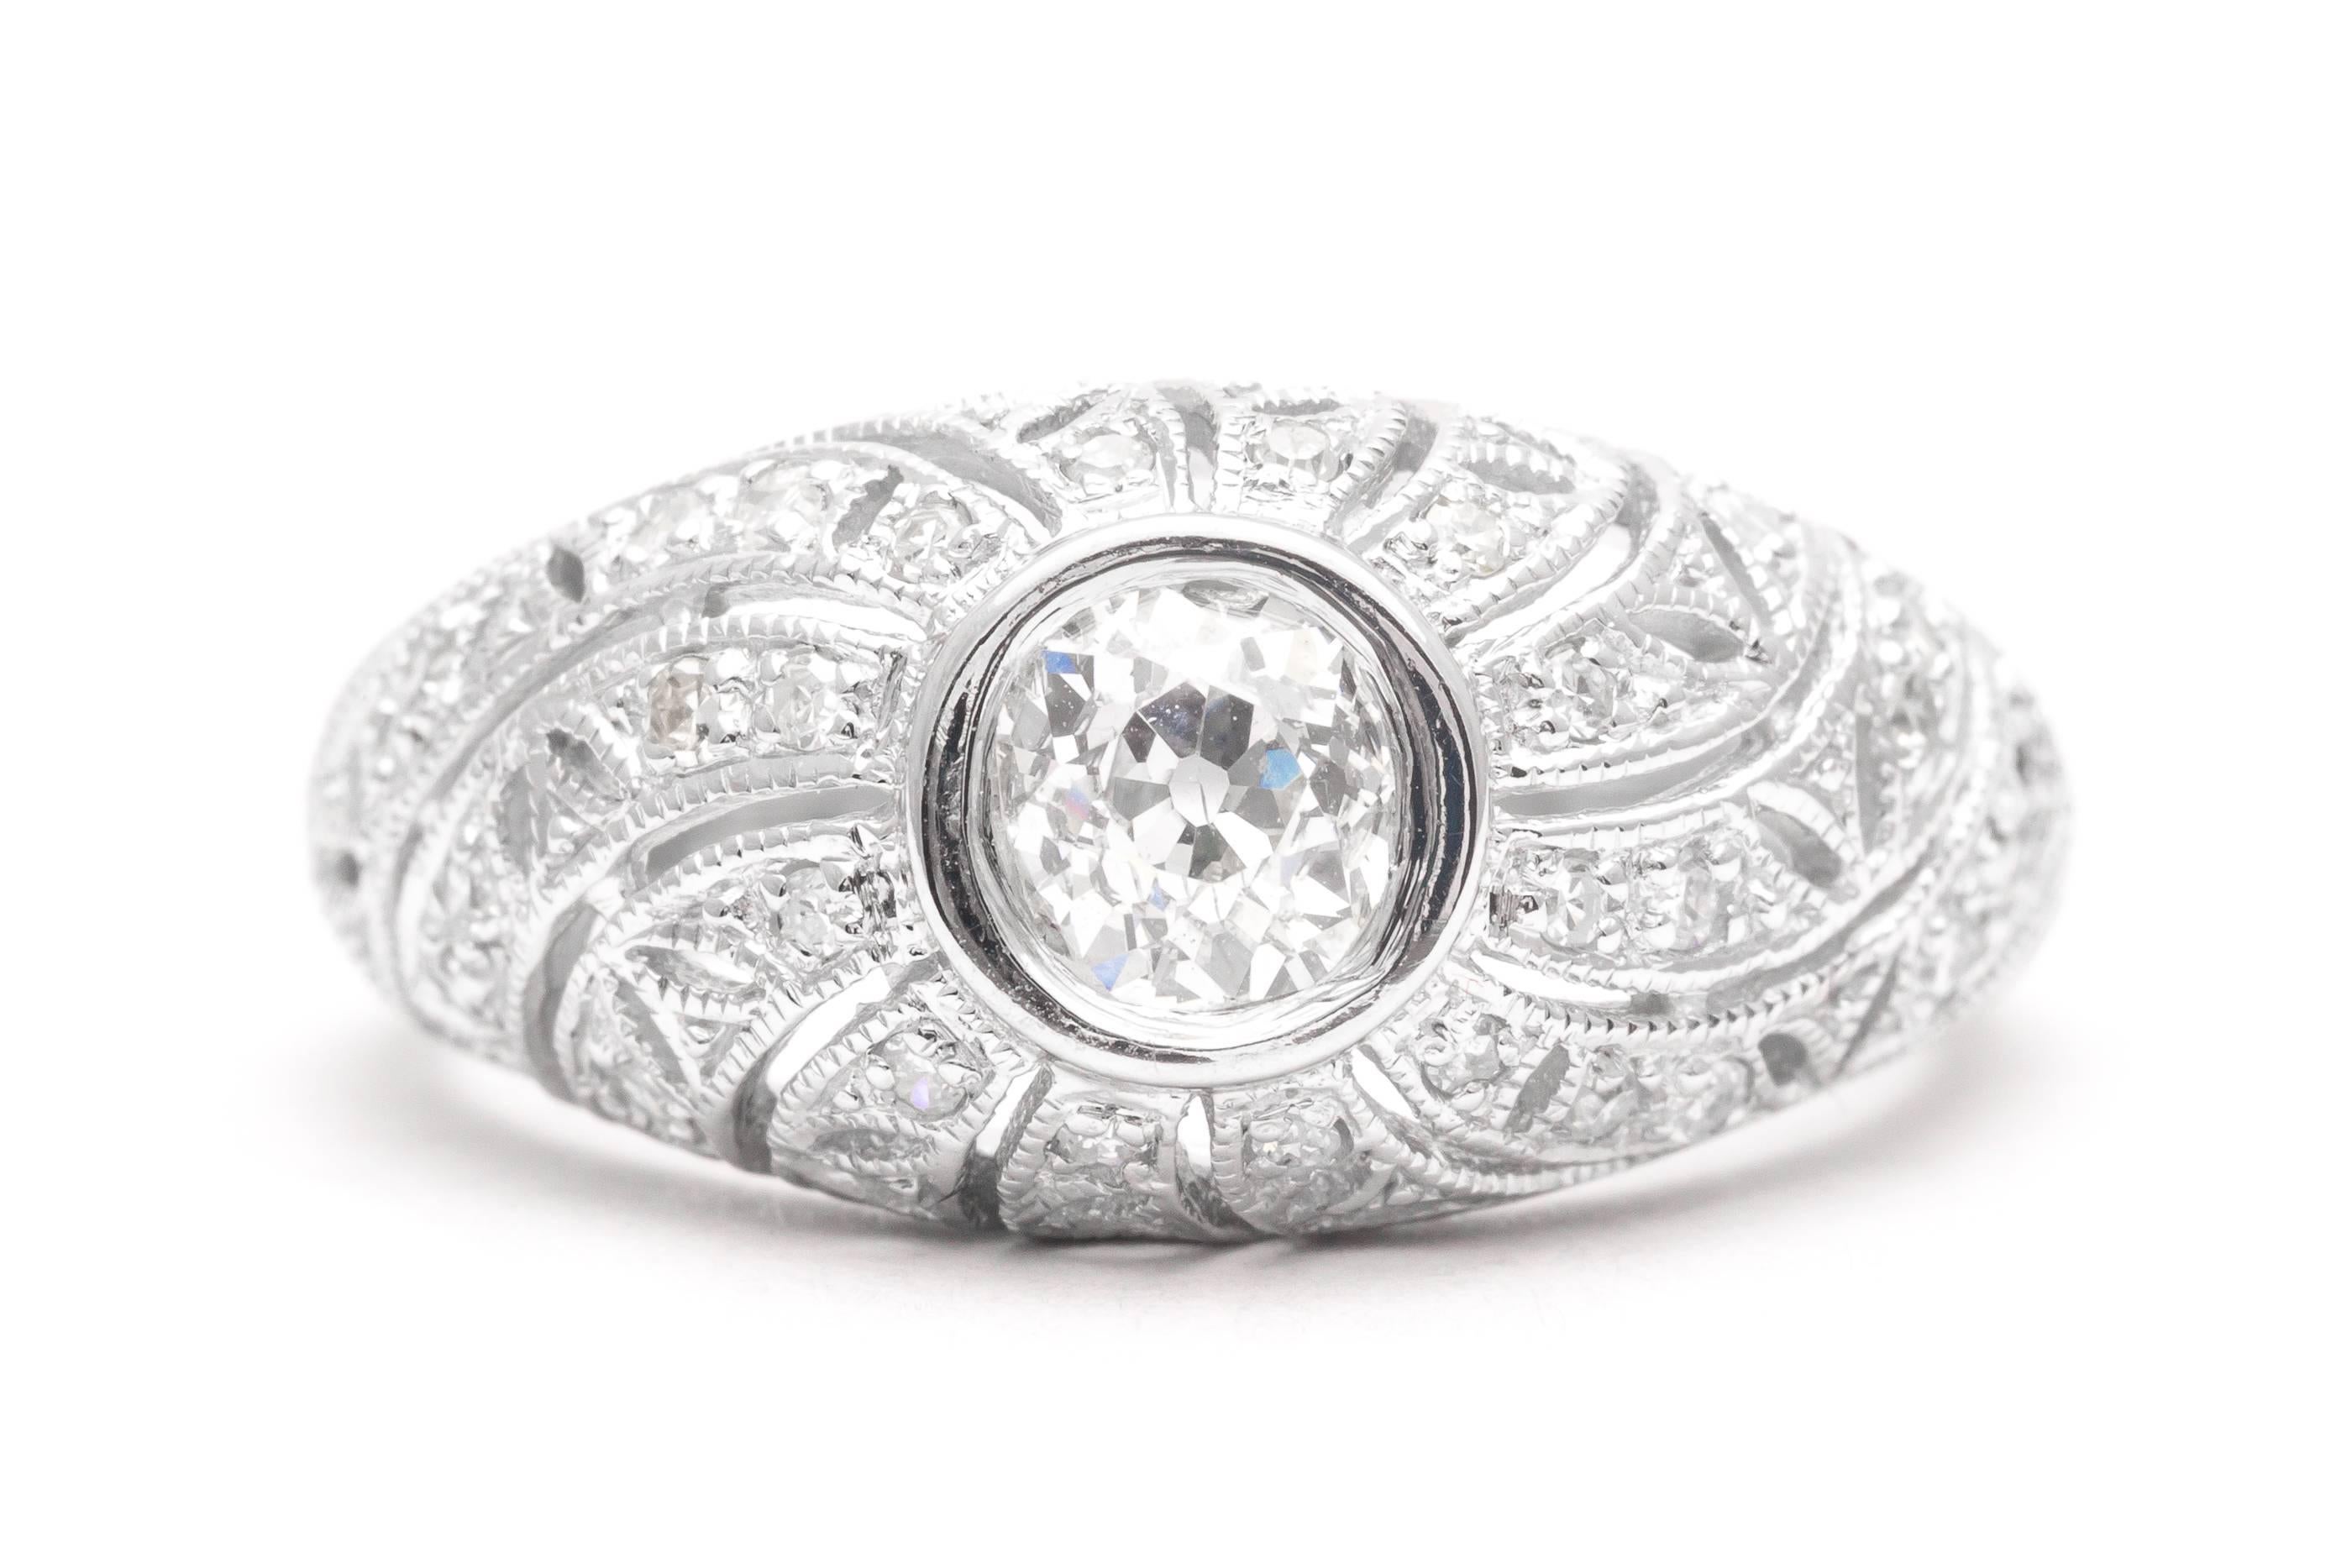 A beautiful swirl design diamond filigree ring in 14 karat white gold. Centered by a bezel set European cut diamond and set throughout with petite single cut diamonds, this ring features hand pierced filigree work along with hand engraving and mille